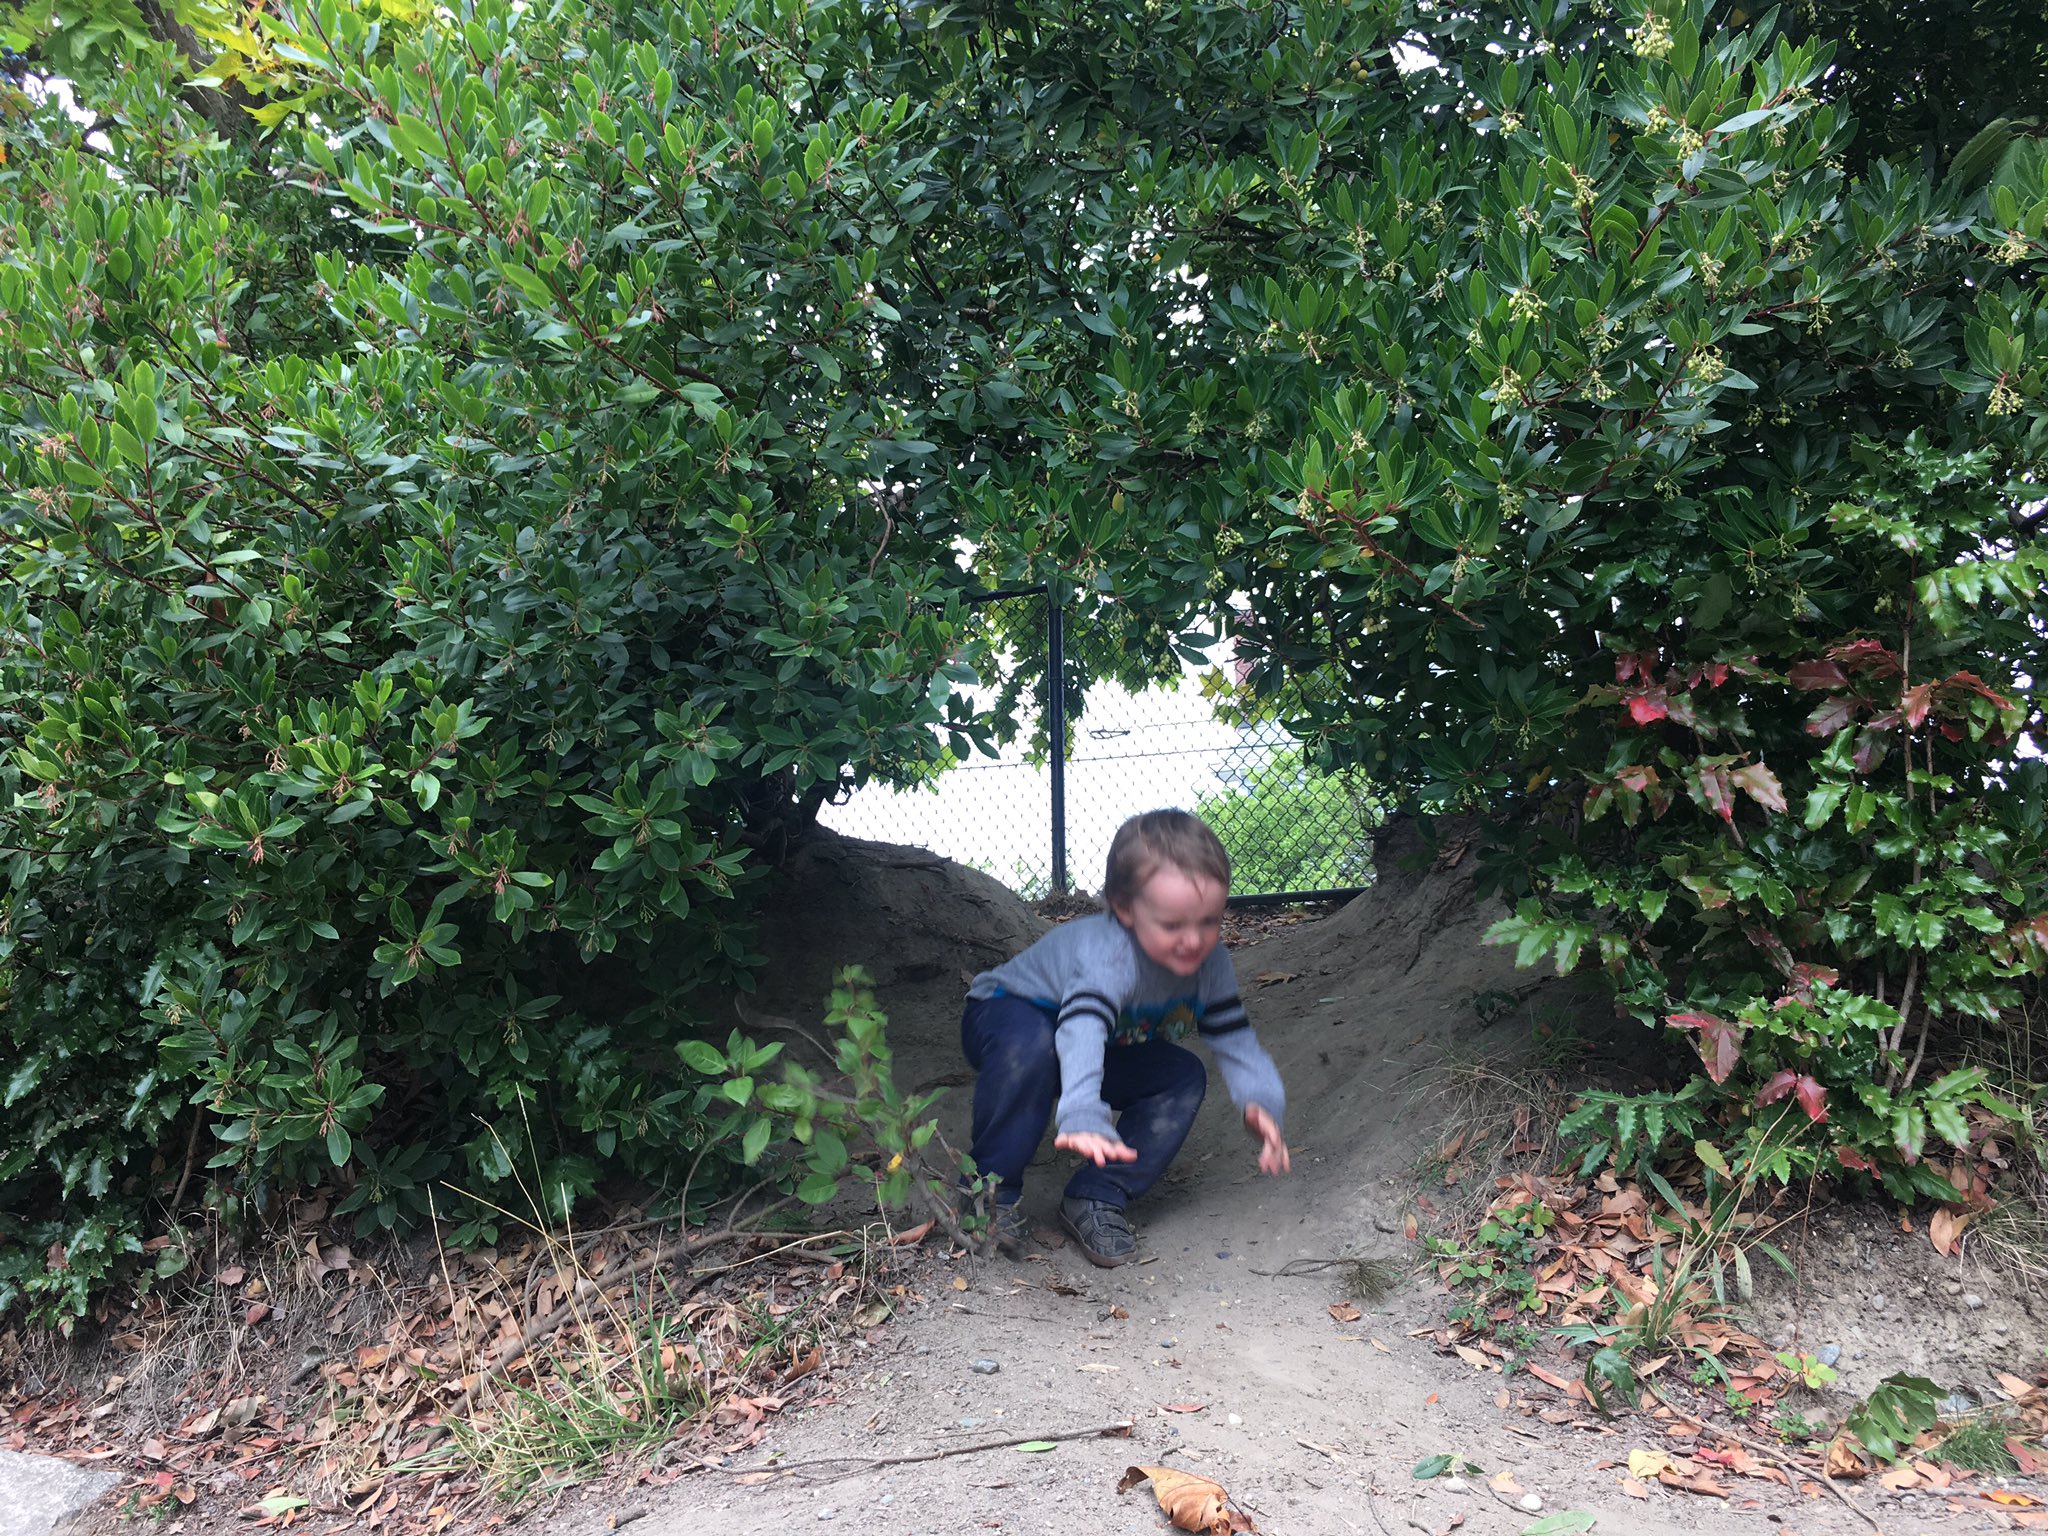 A green hedge with a small arched hole in the middle. Julian is crouched and is sliding down the dirt path that goes under the hedge.